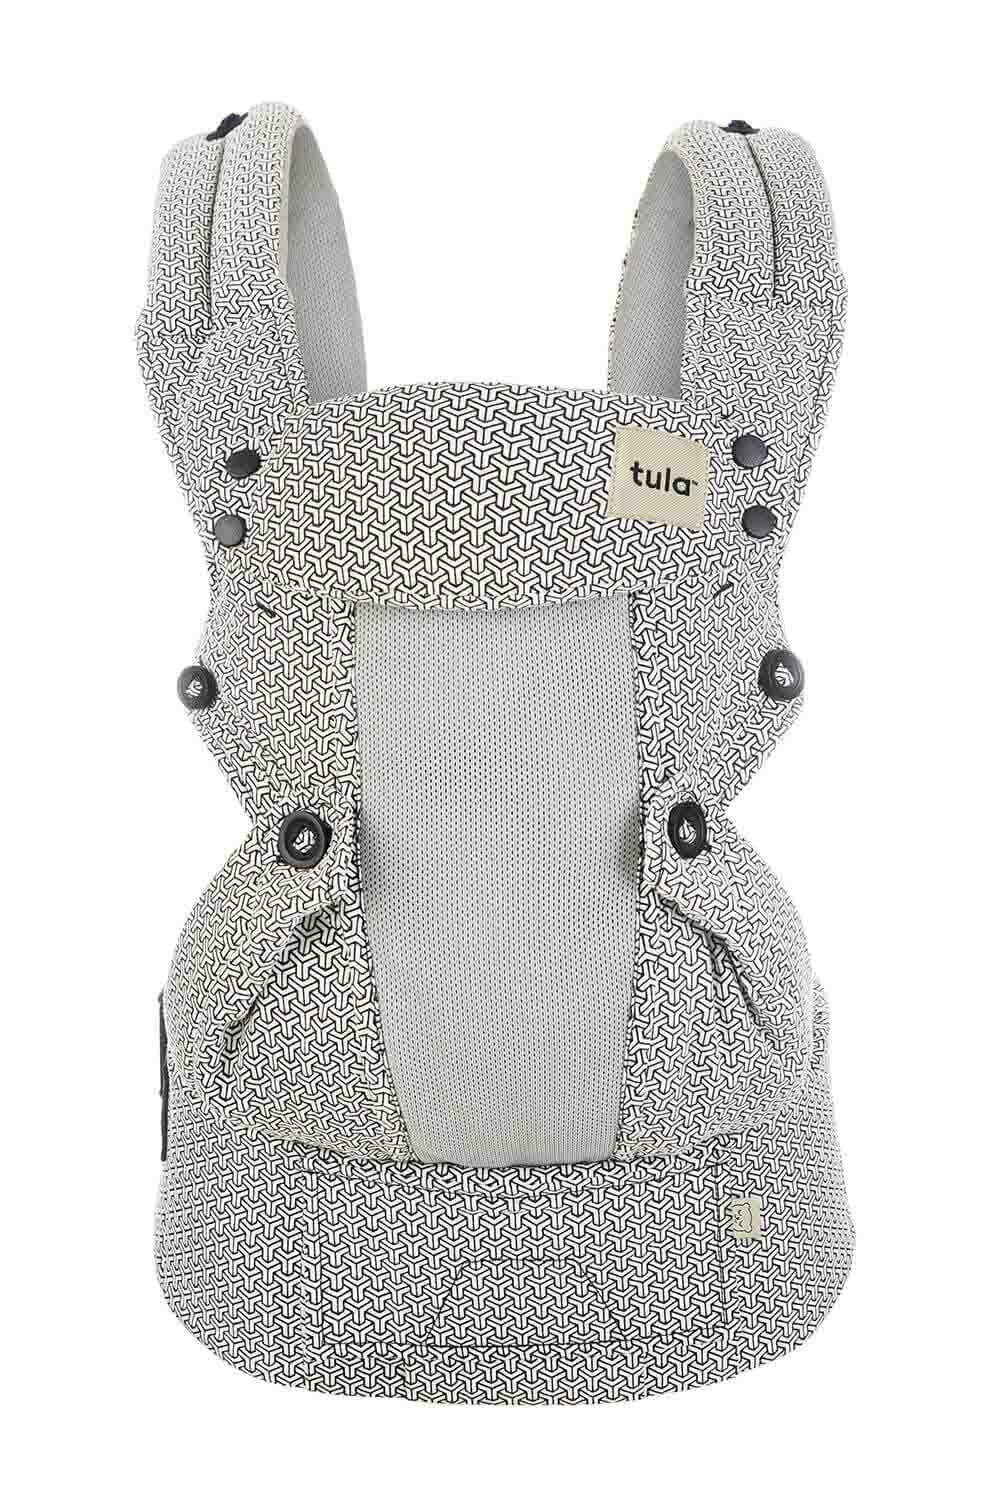 Explore Front & Back Baby Carrier - Coast Infinite